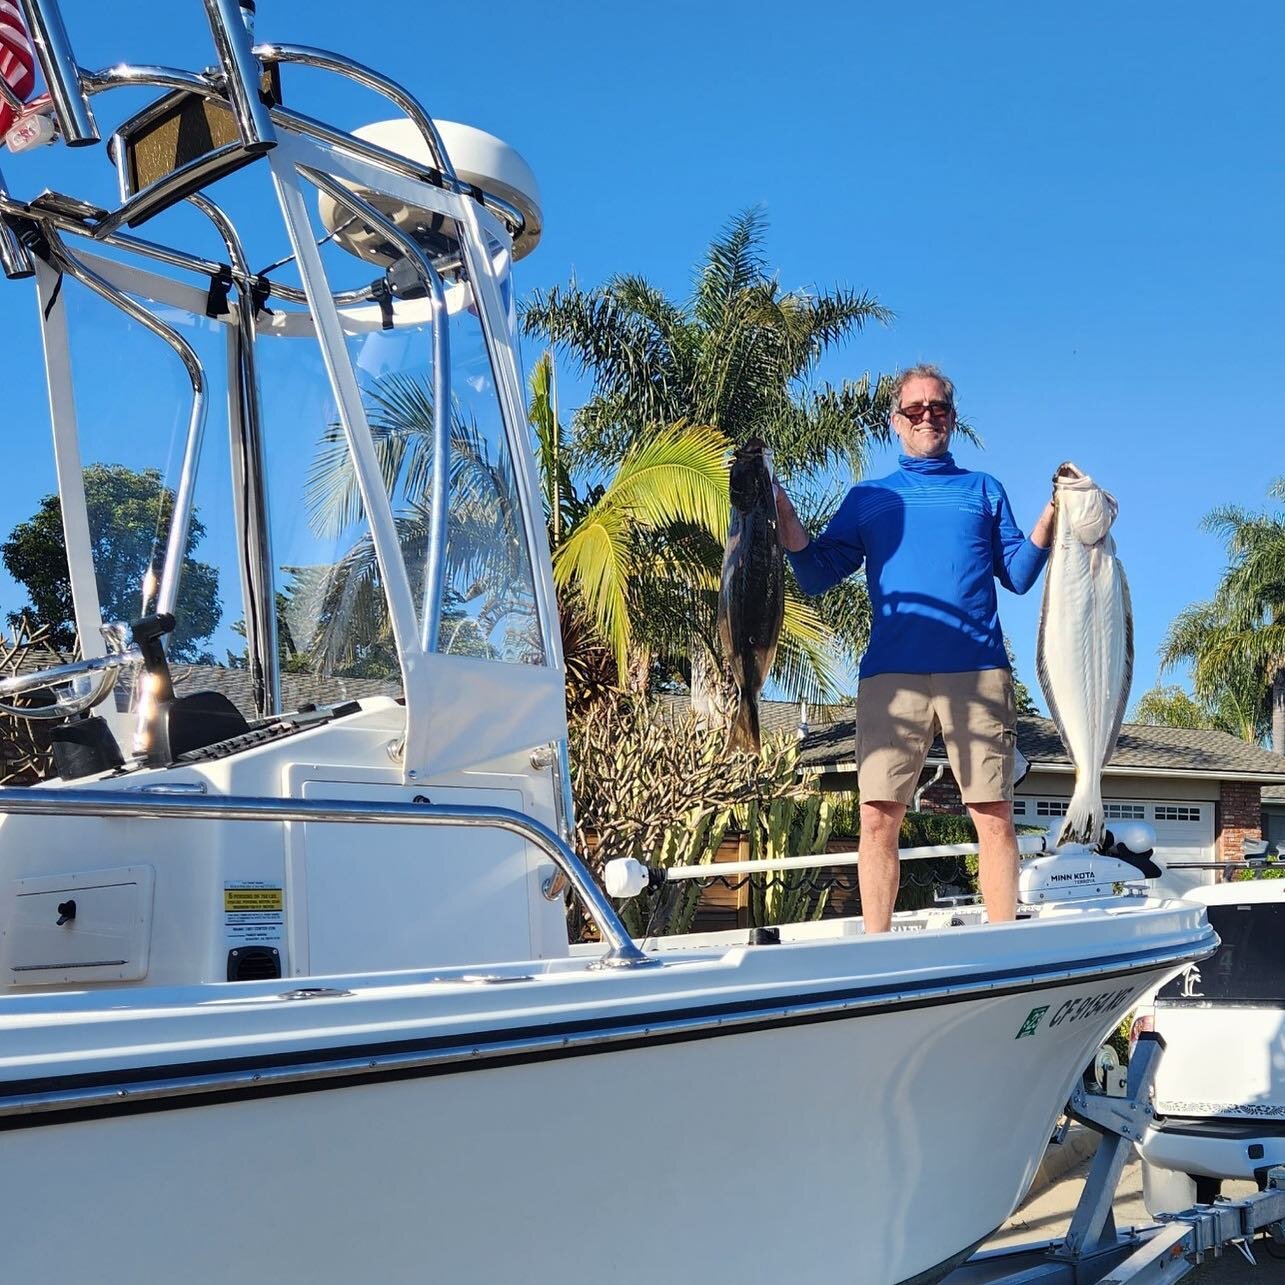 Looks like some things never change &hellip;. The new owners started off in the right direction with our former flagship 1801 with some flatfish 💪🏻🇺🇸 The slay continues with her new owners .